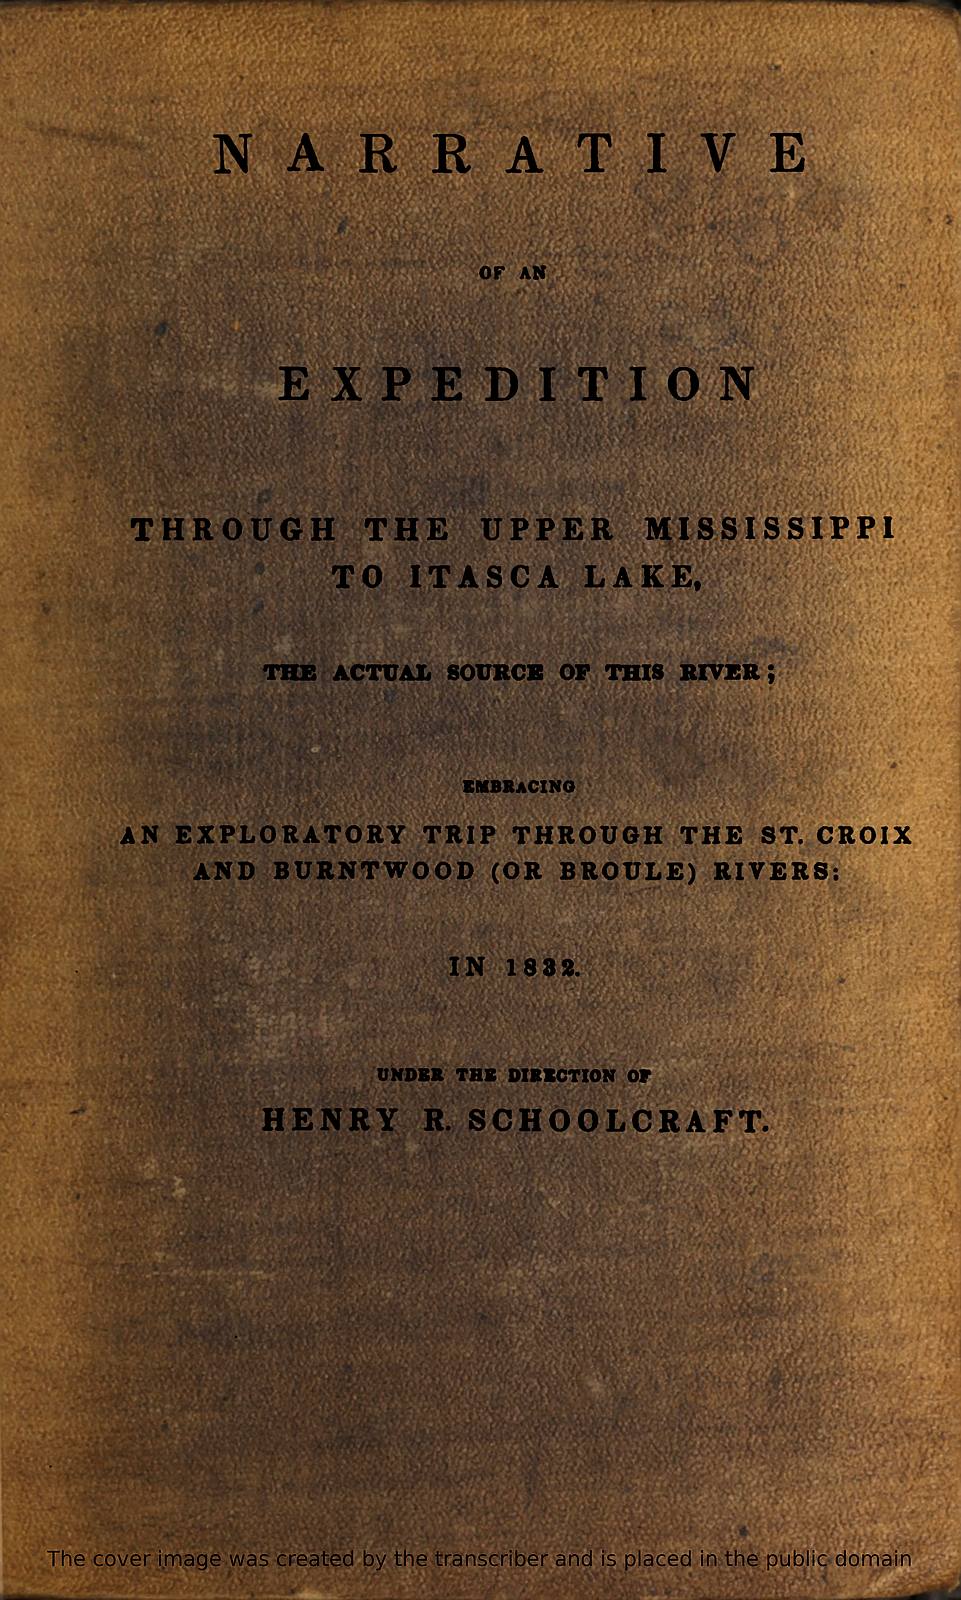 The Project Gutenberg eBook of Narrative of an Expedition Through the Upper Mississippi to Itasca Lake, the Actual Source of this River, by Henry Rowe Schoolcraft image pic